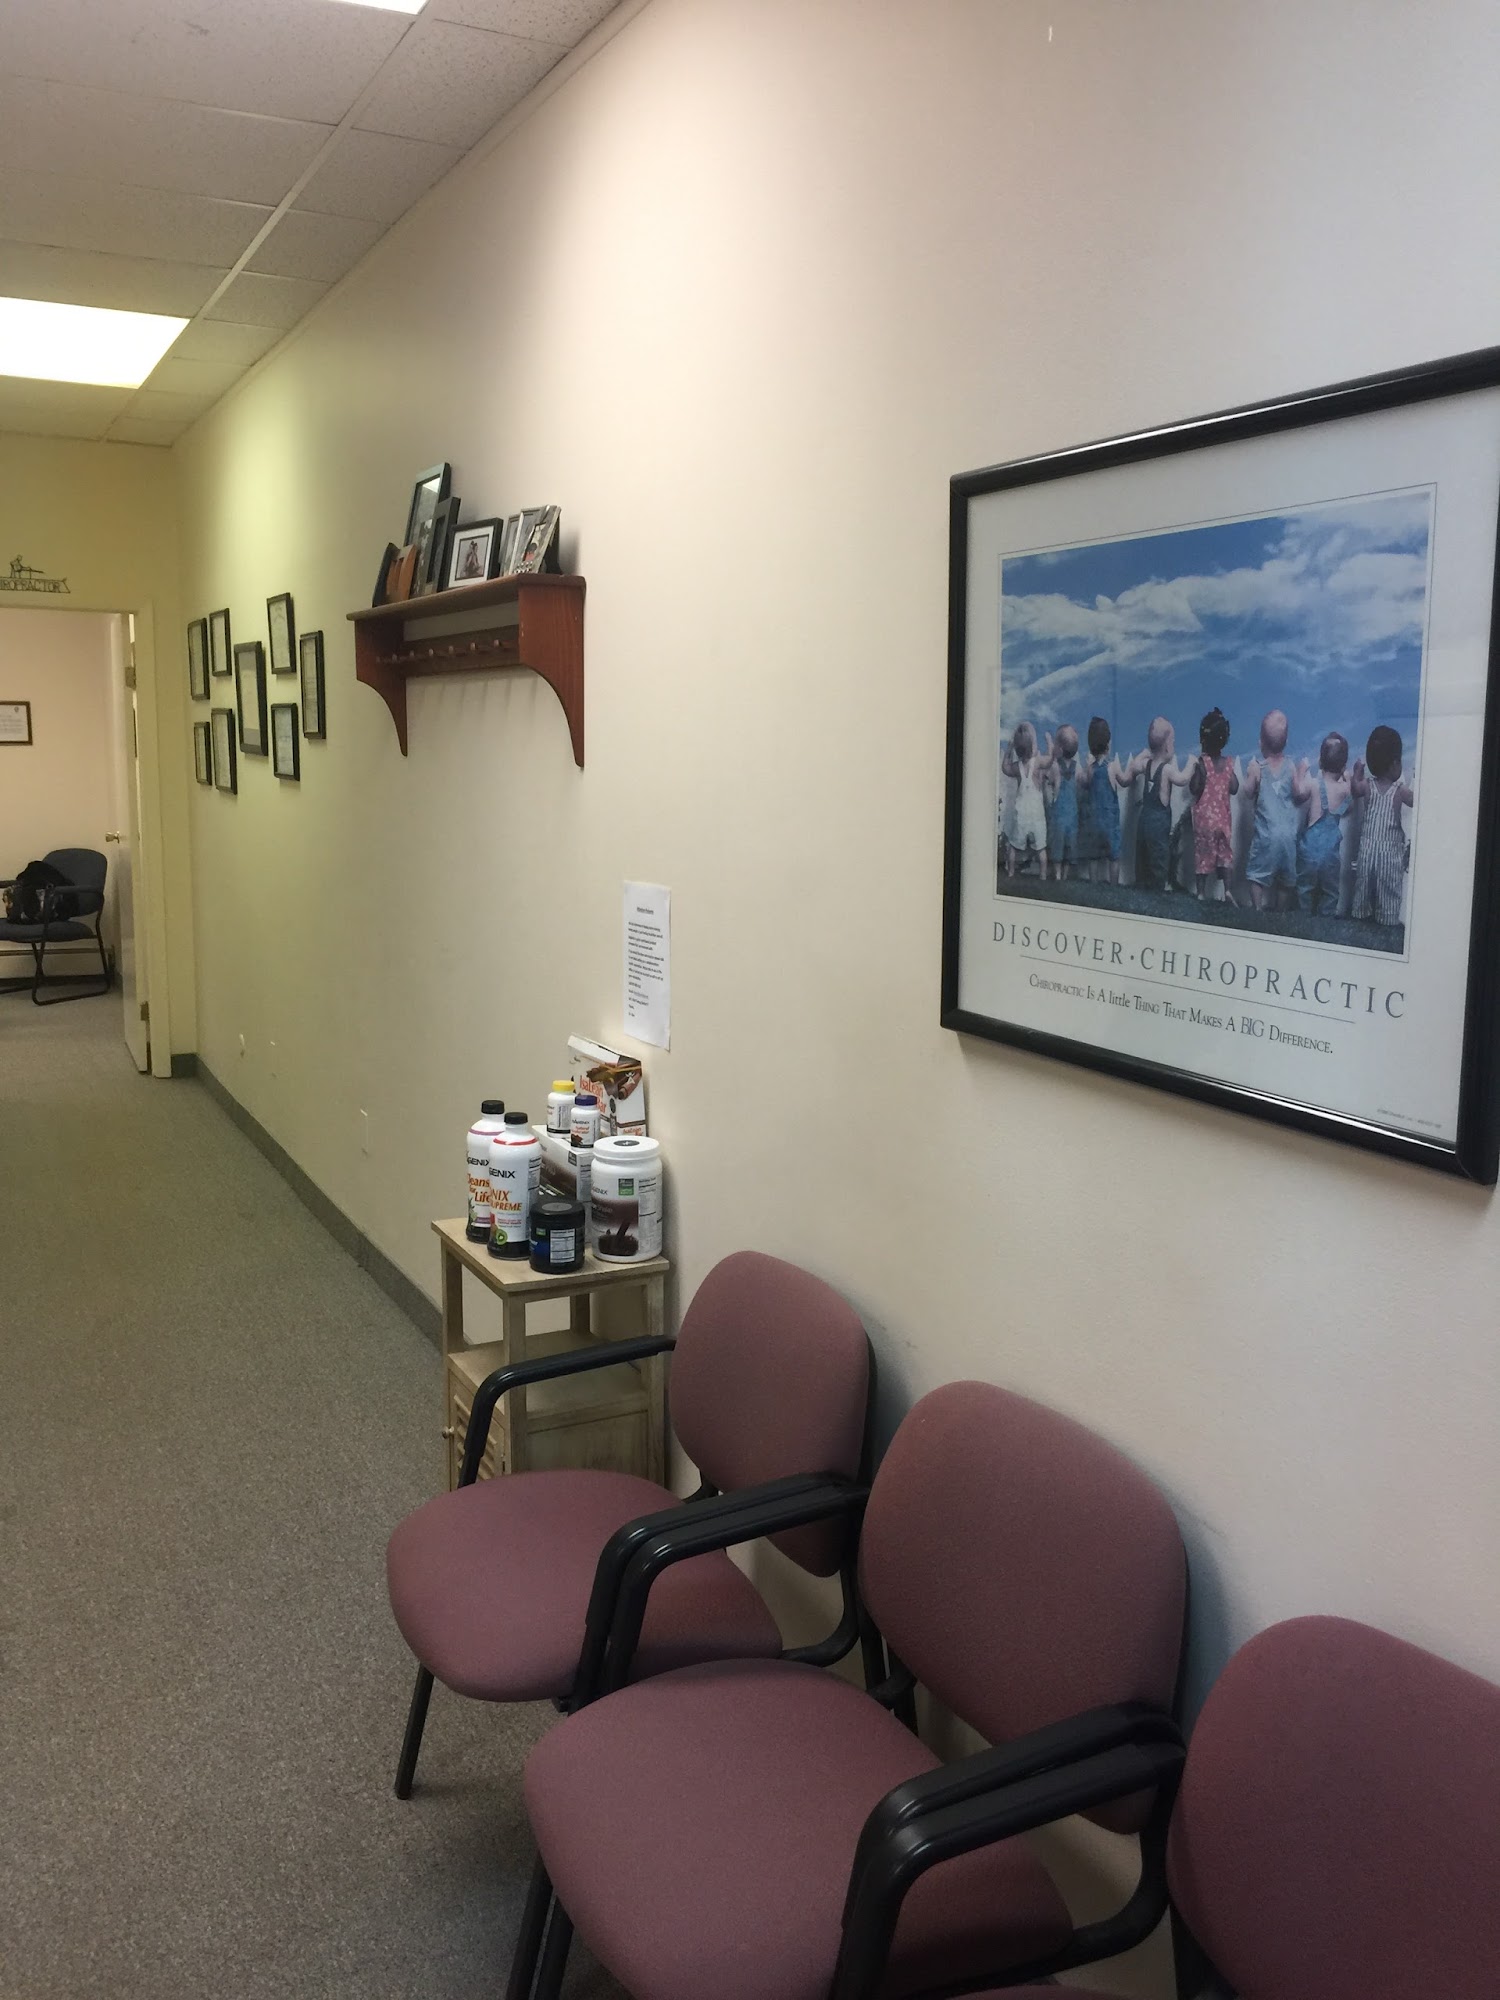 Speedwell Family Chiropractic: Dr. Glen Katz and Dr.Gregory Martin